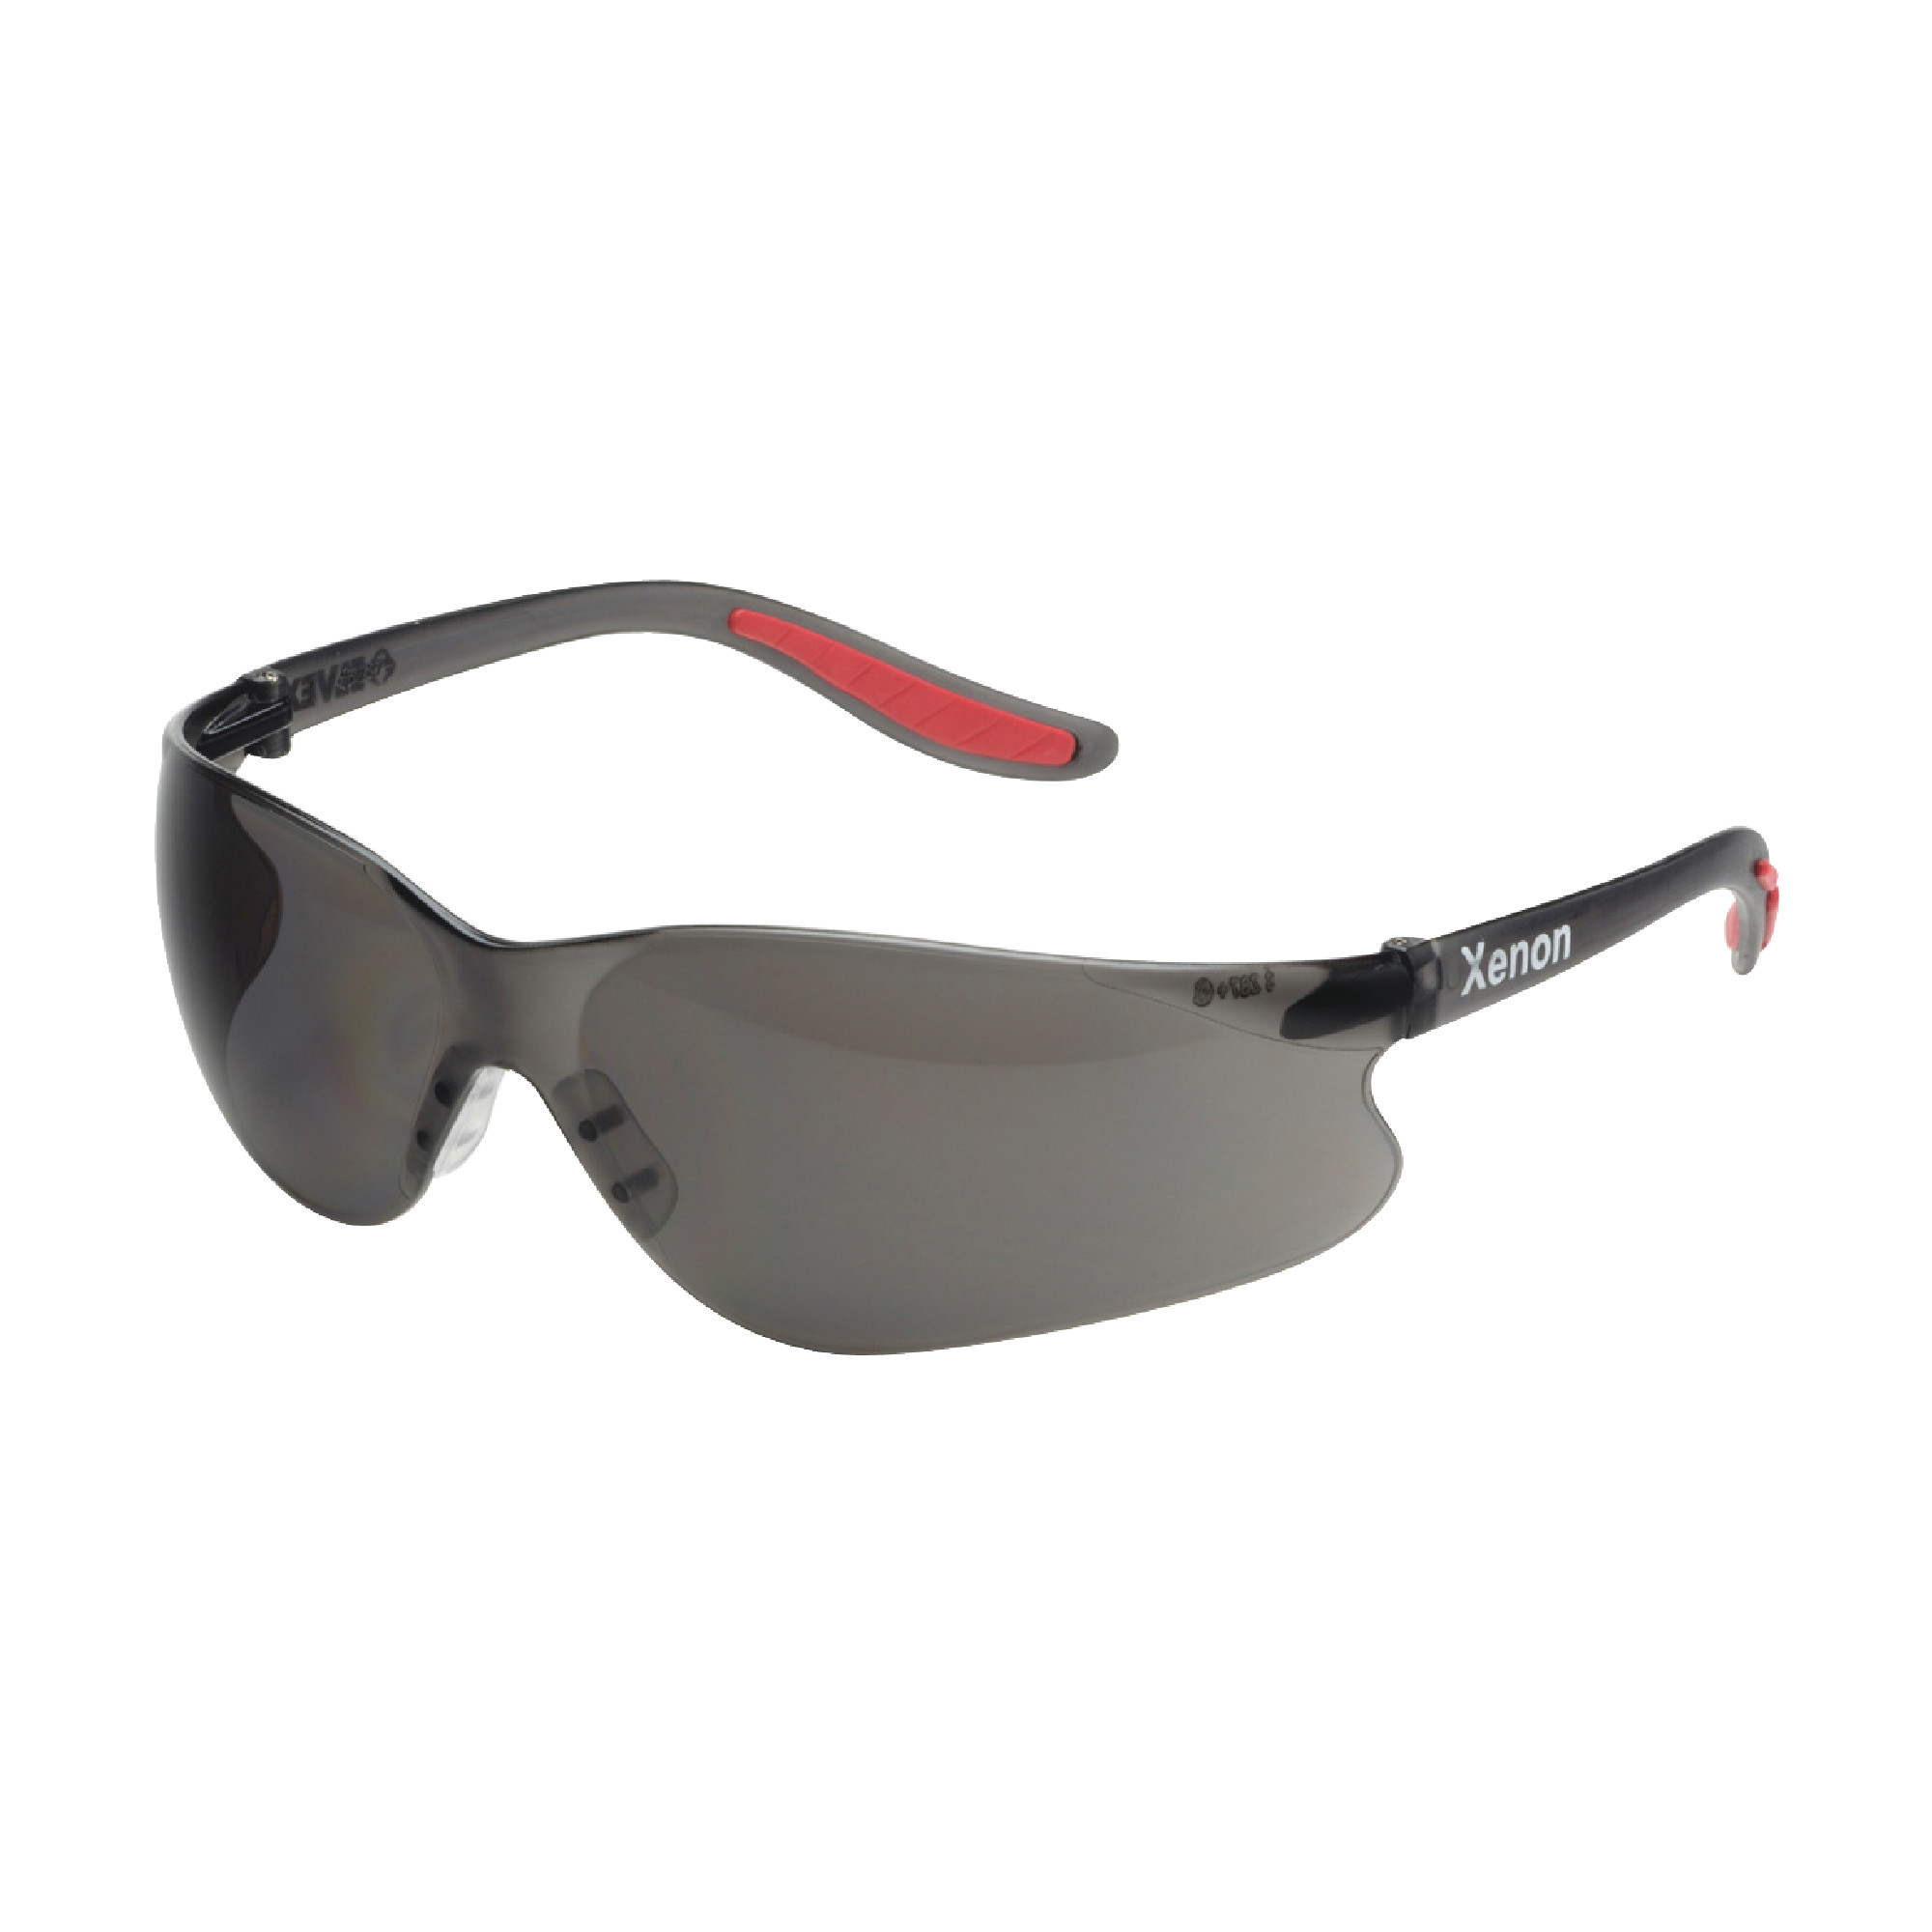 ELVEX Xenon Gray Lens With Safety Glasses Anti-Fog Coating